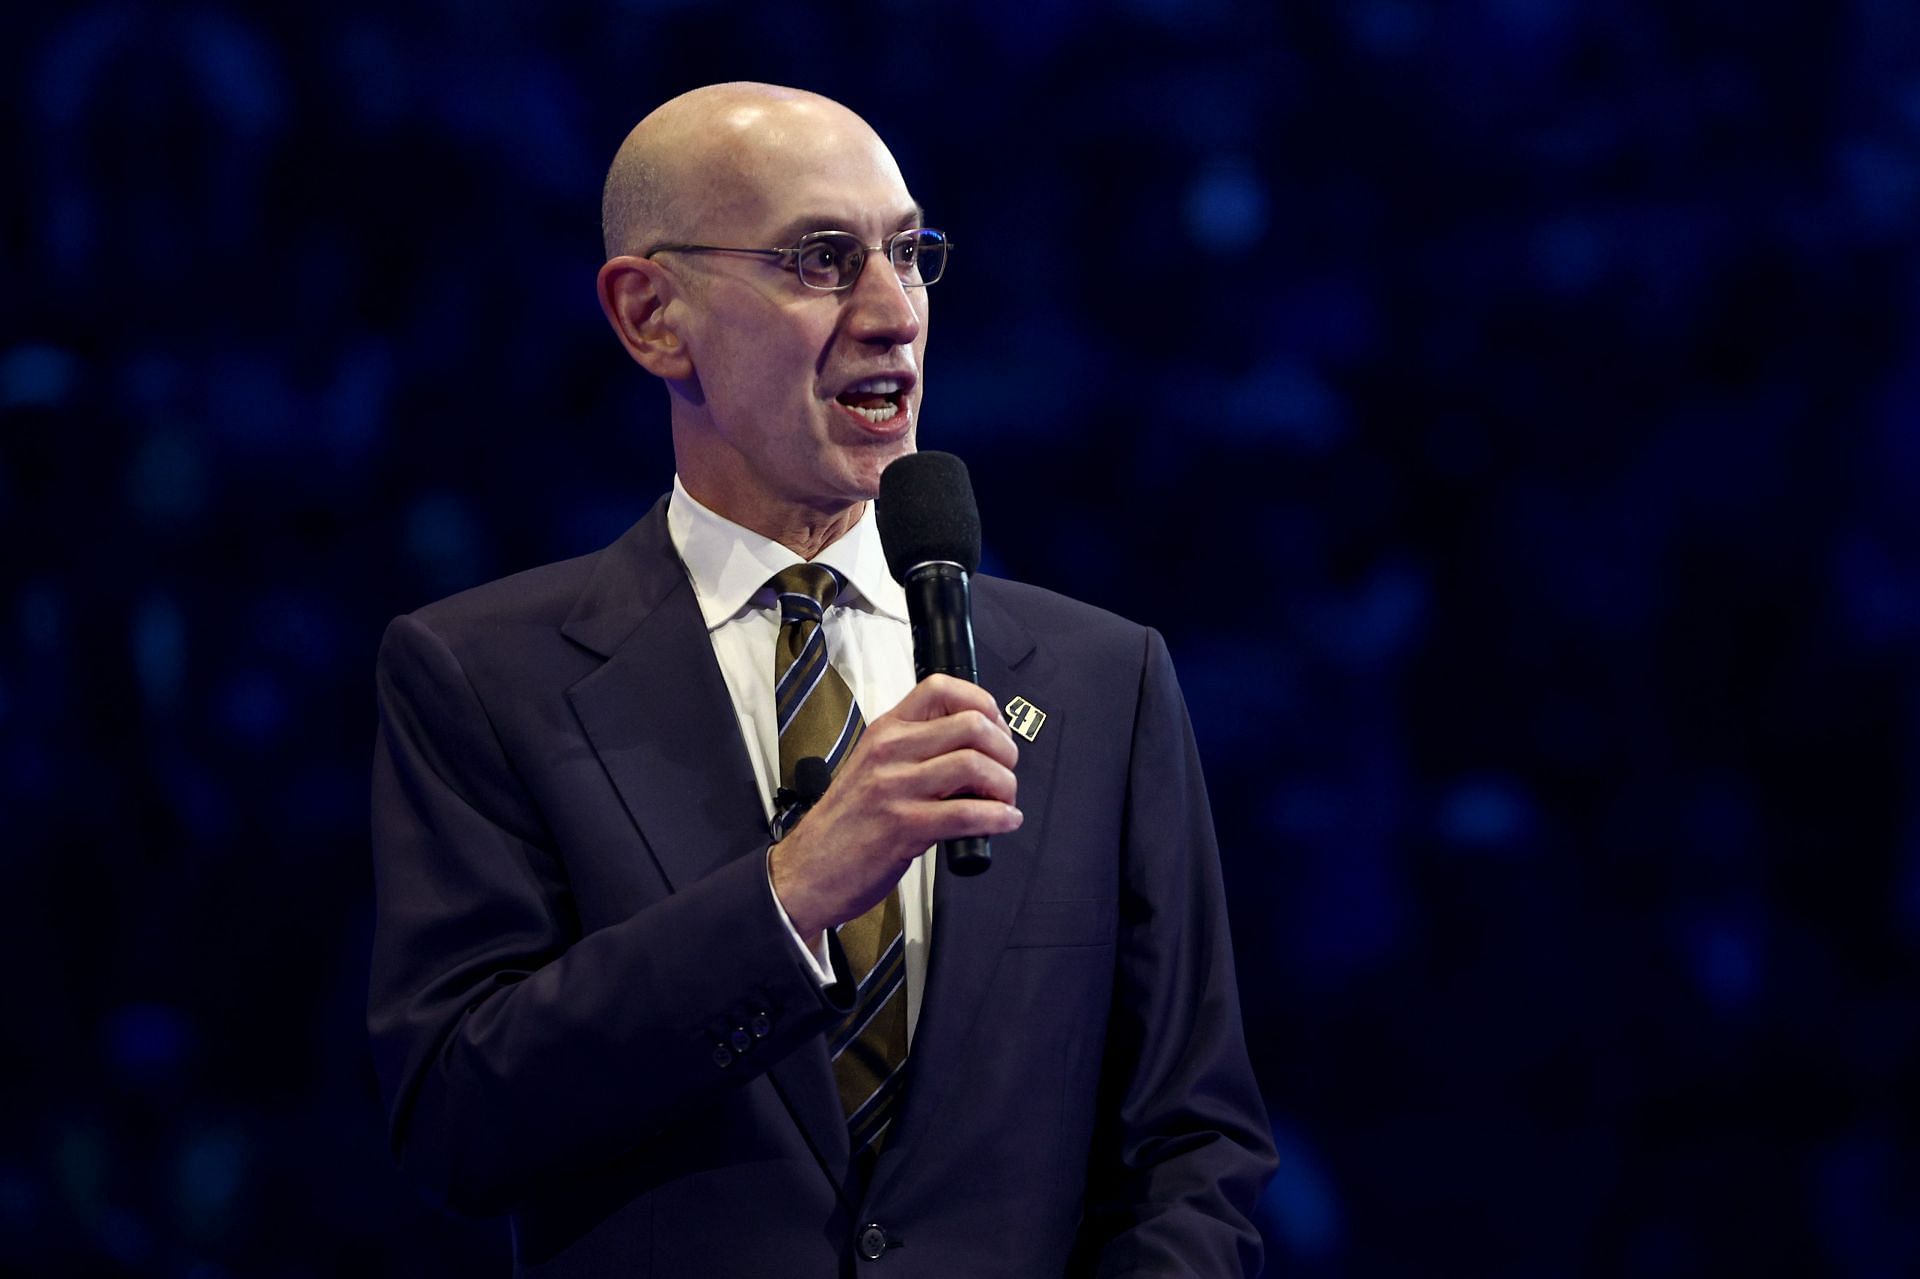 NBA commissioner Adam Silver pictured during an event